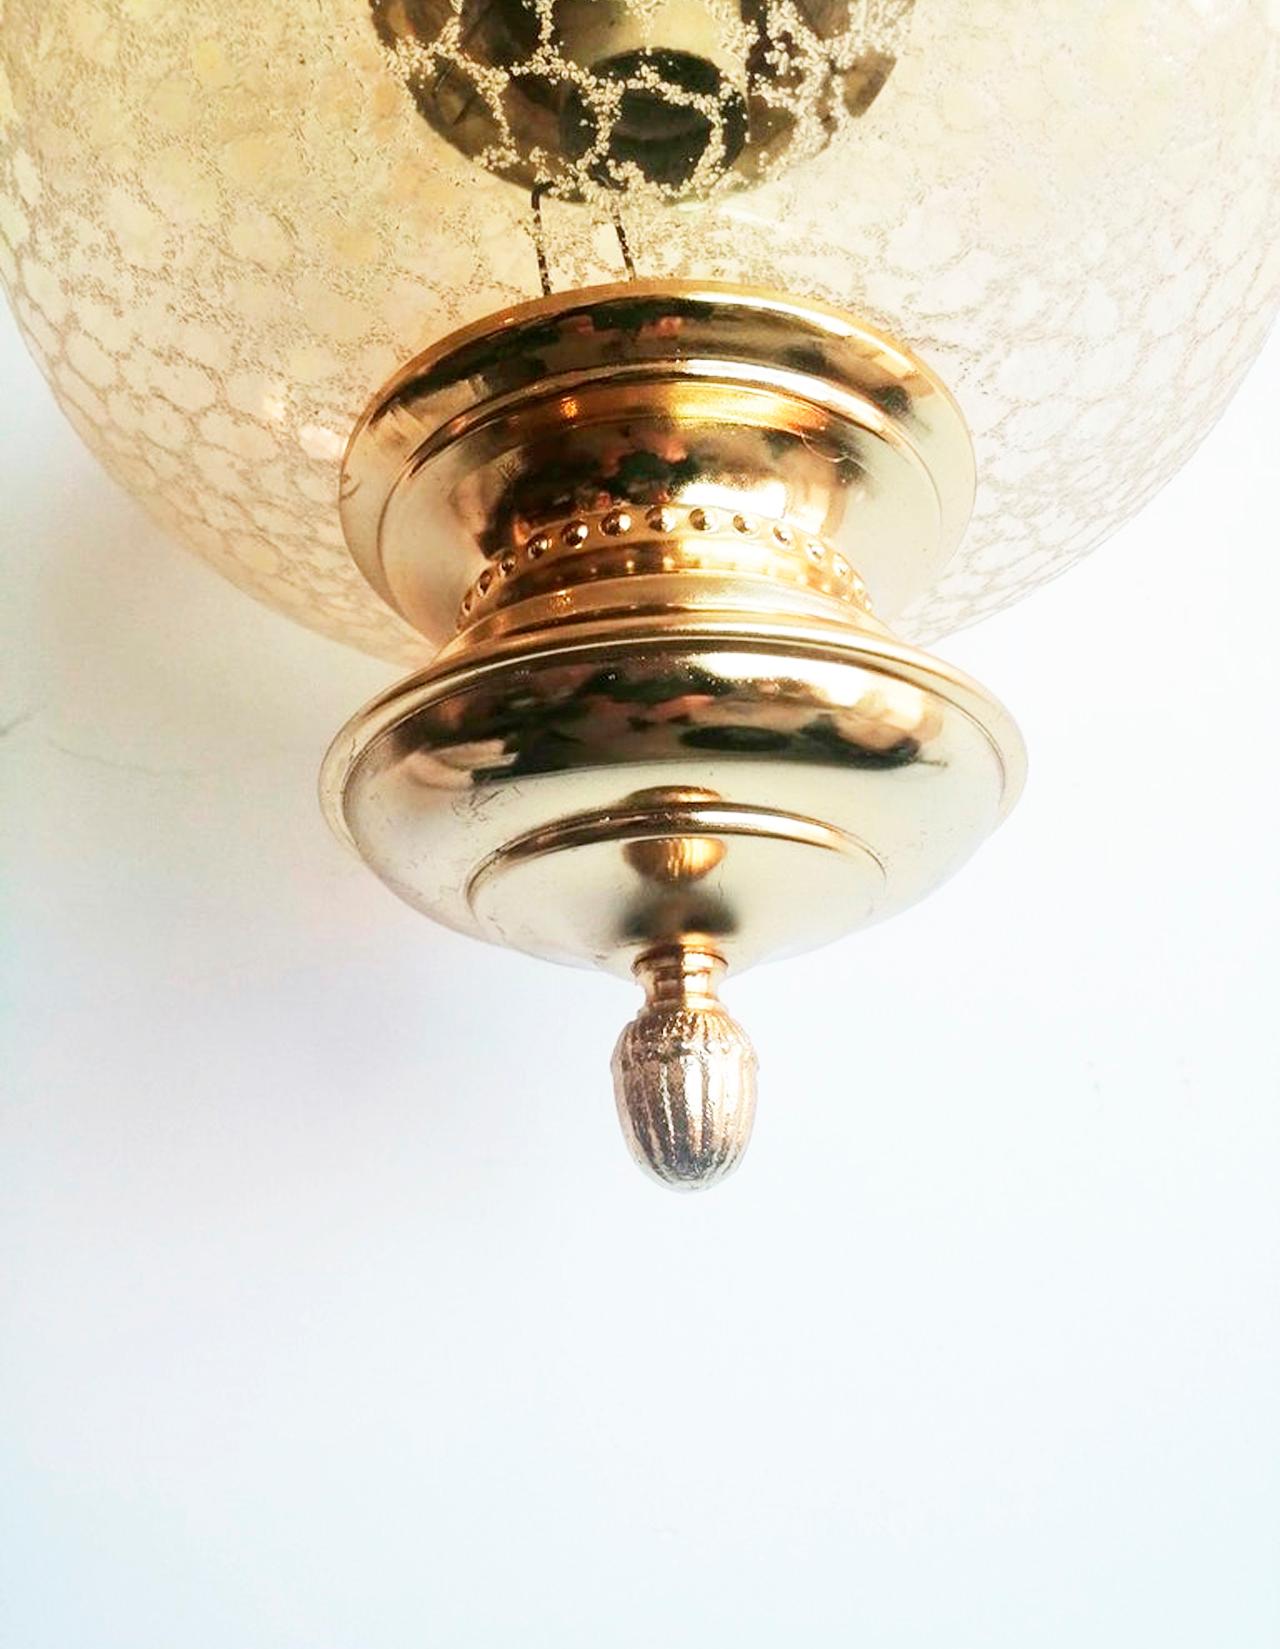 Other Golden Lamps Lanterns or Pendant  Gold  Brass and Glass, Spain Mid 20th Century For Sale